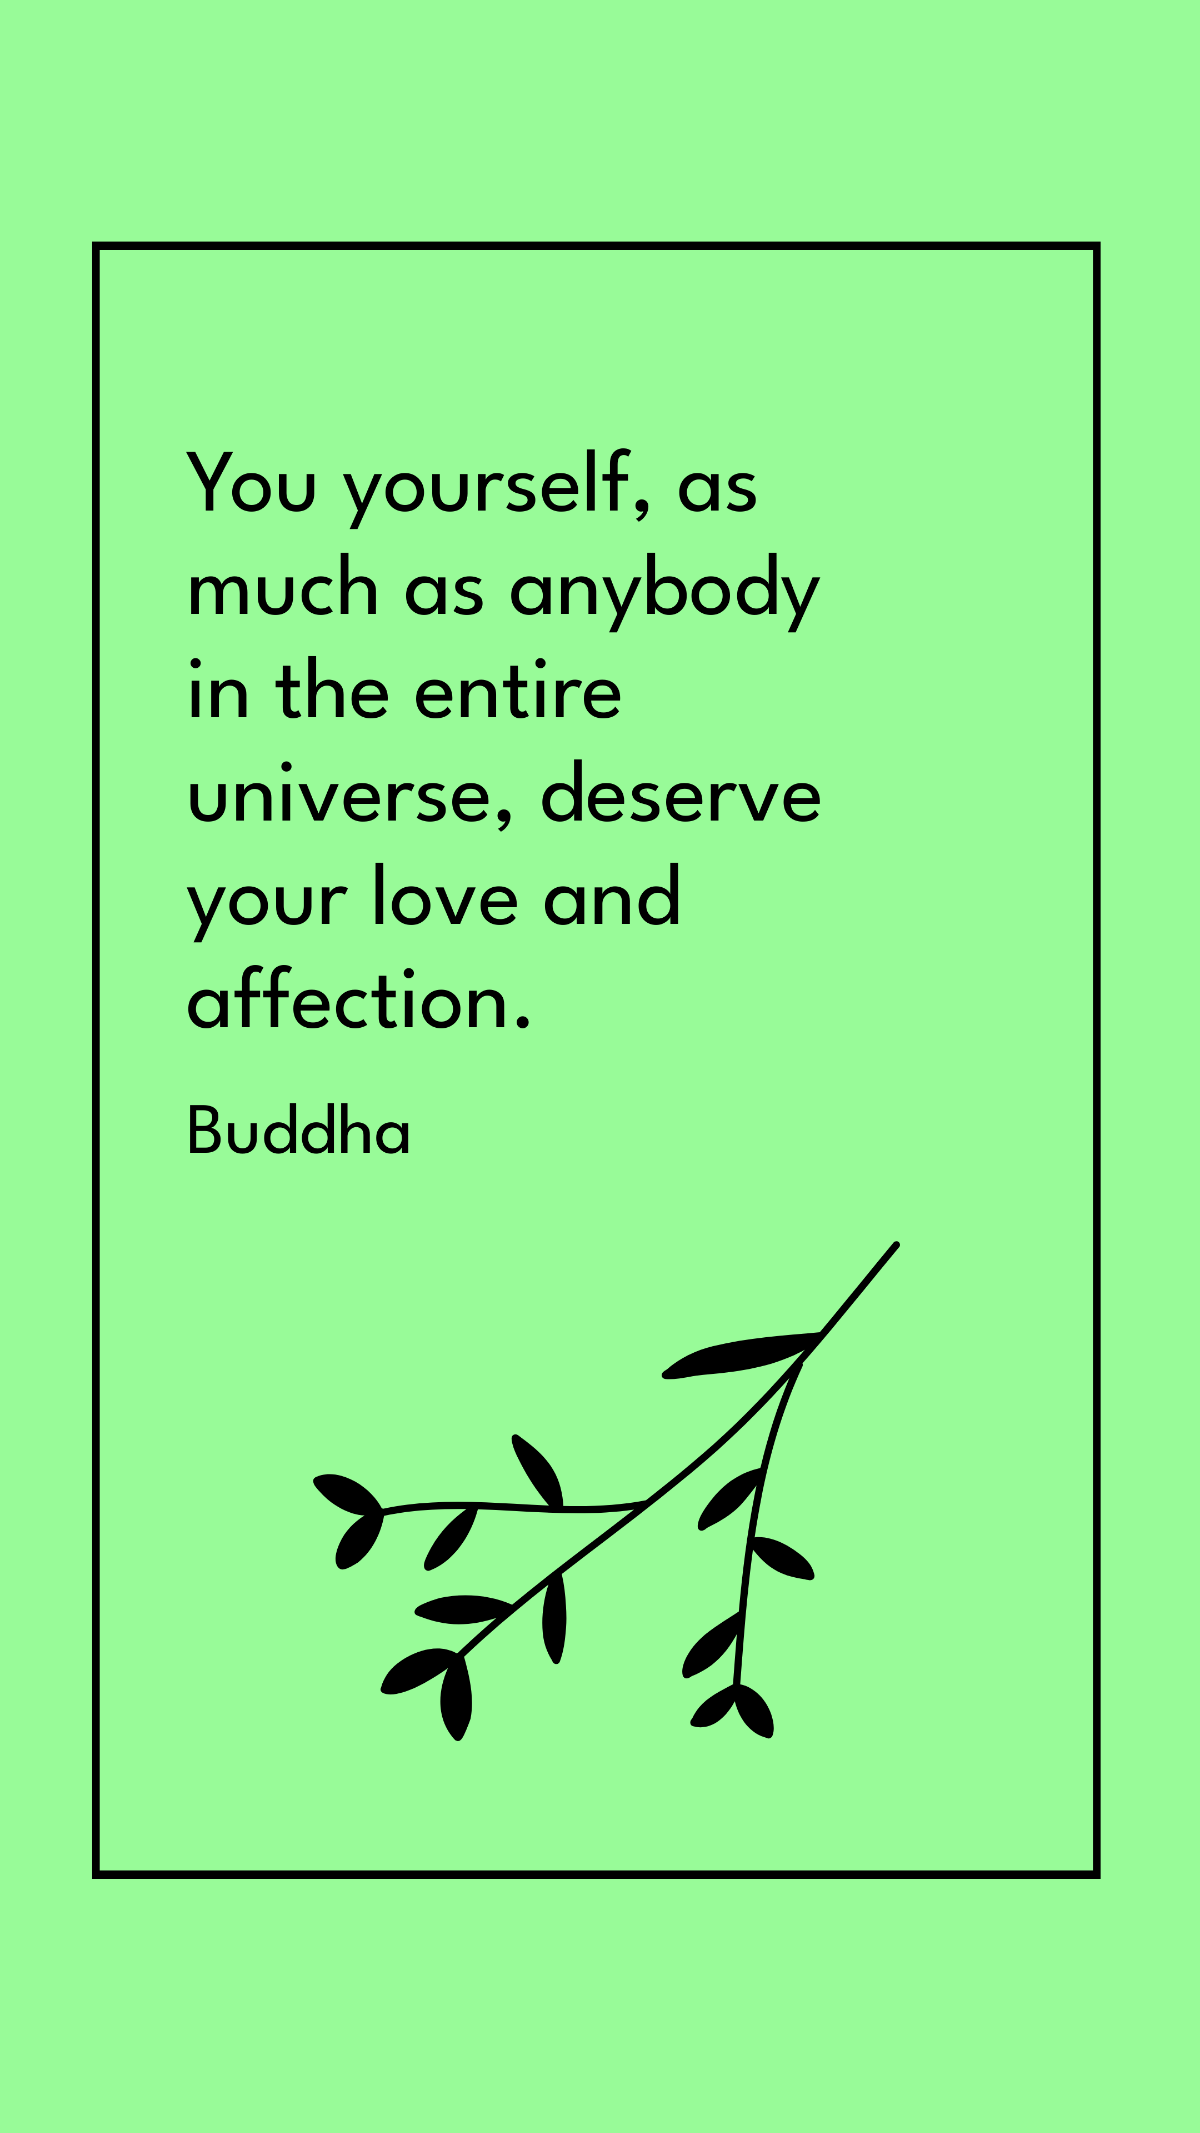 Free Buddha - You yourself, as much as anybody in the entire universe, deserve your love and affection. Template